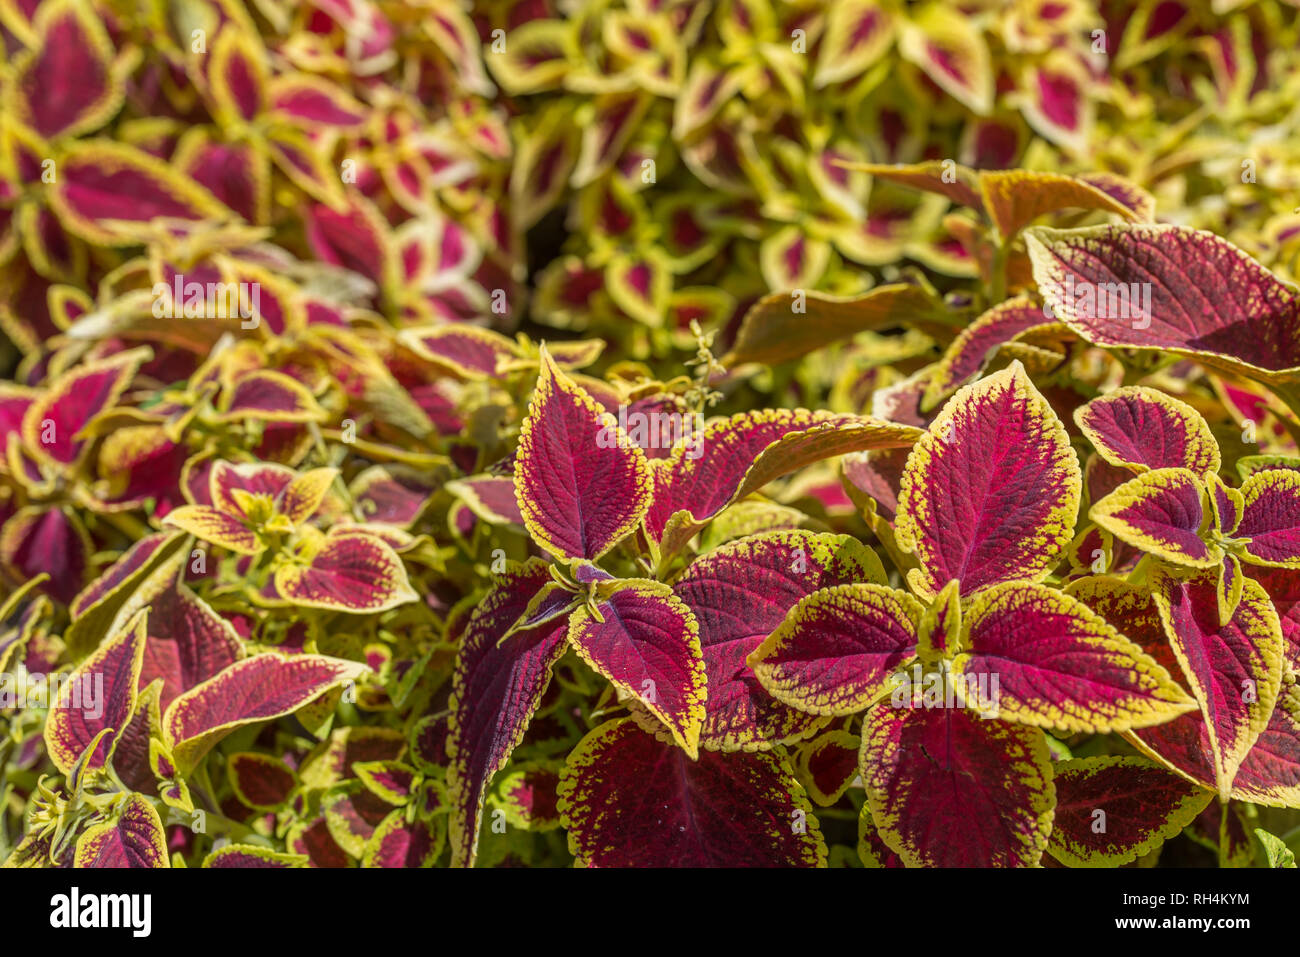 Red-yellow Leaves of the Coleus Plant Stock Photo